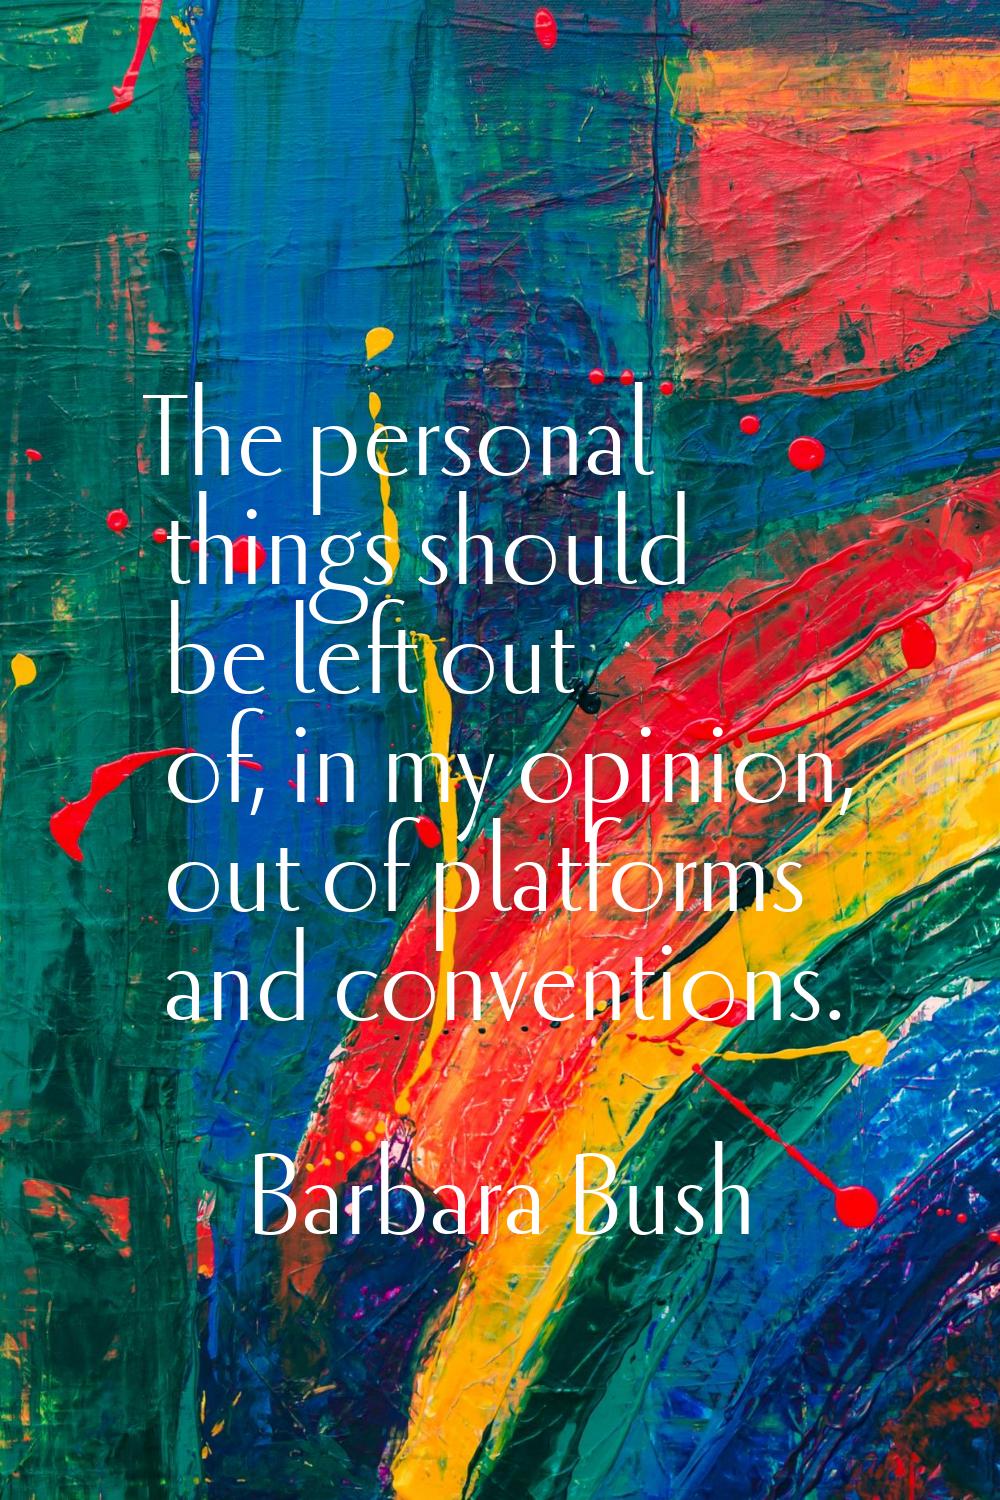 The personal things should be left out of, in my opinion, out of platforms and conventions.